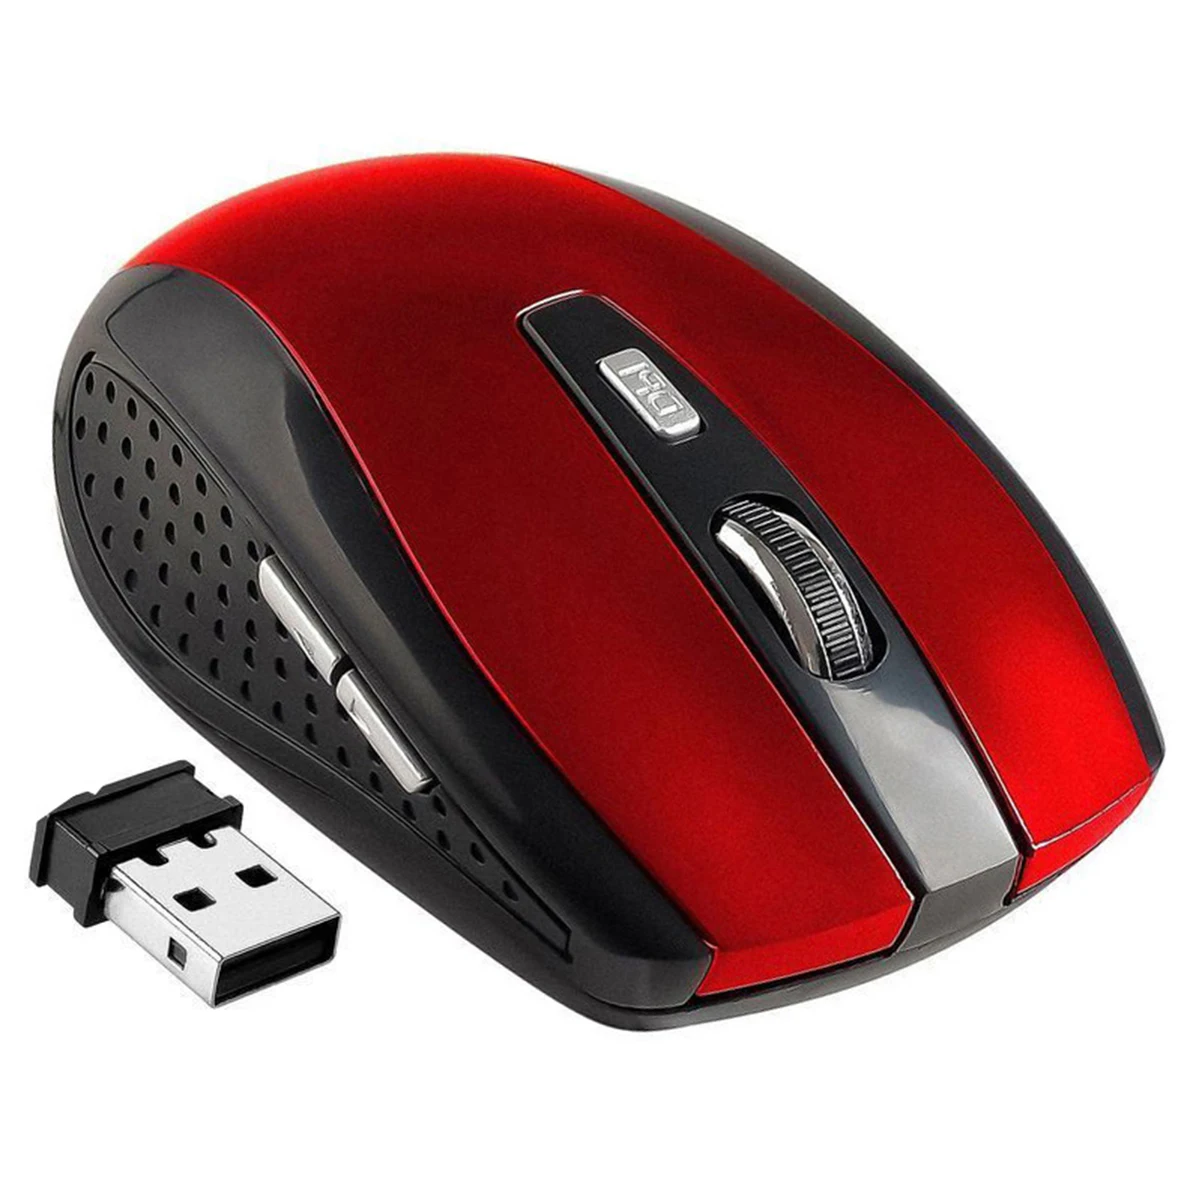 

Wireless Mouse 2.4 GHz Wireless Optical Mini Mouse Mice For Laptop PC Computers Low Noise 800-1600DPI High Definition